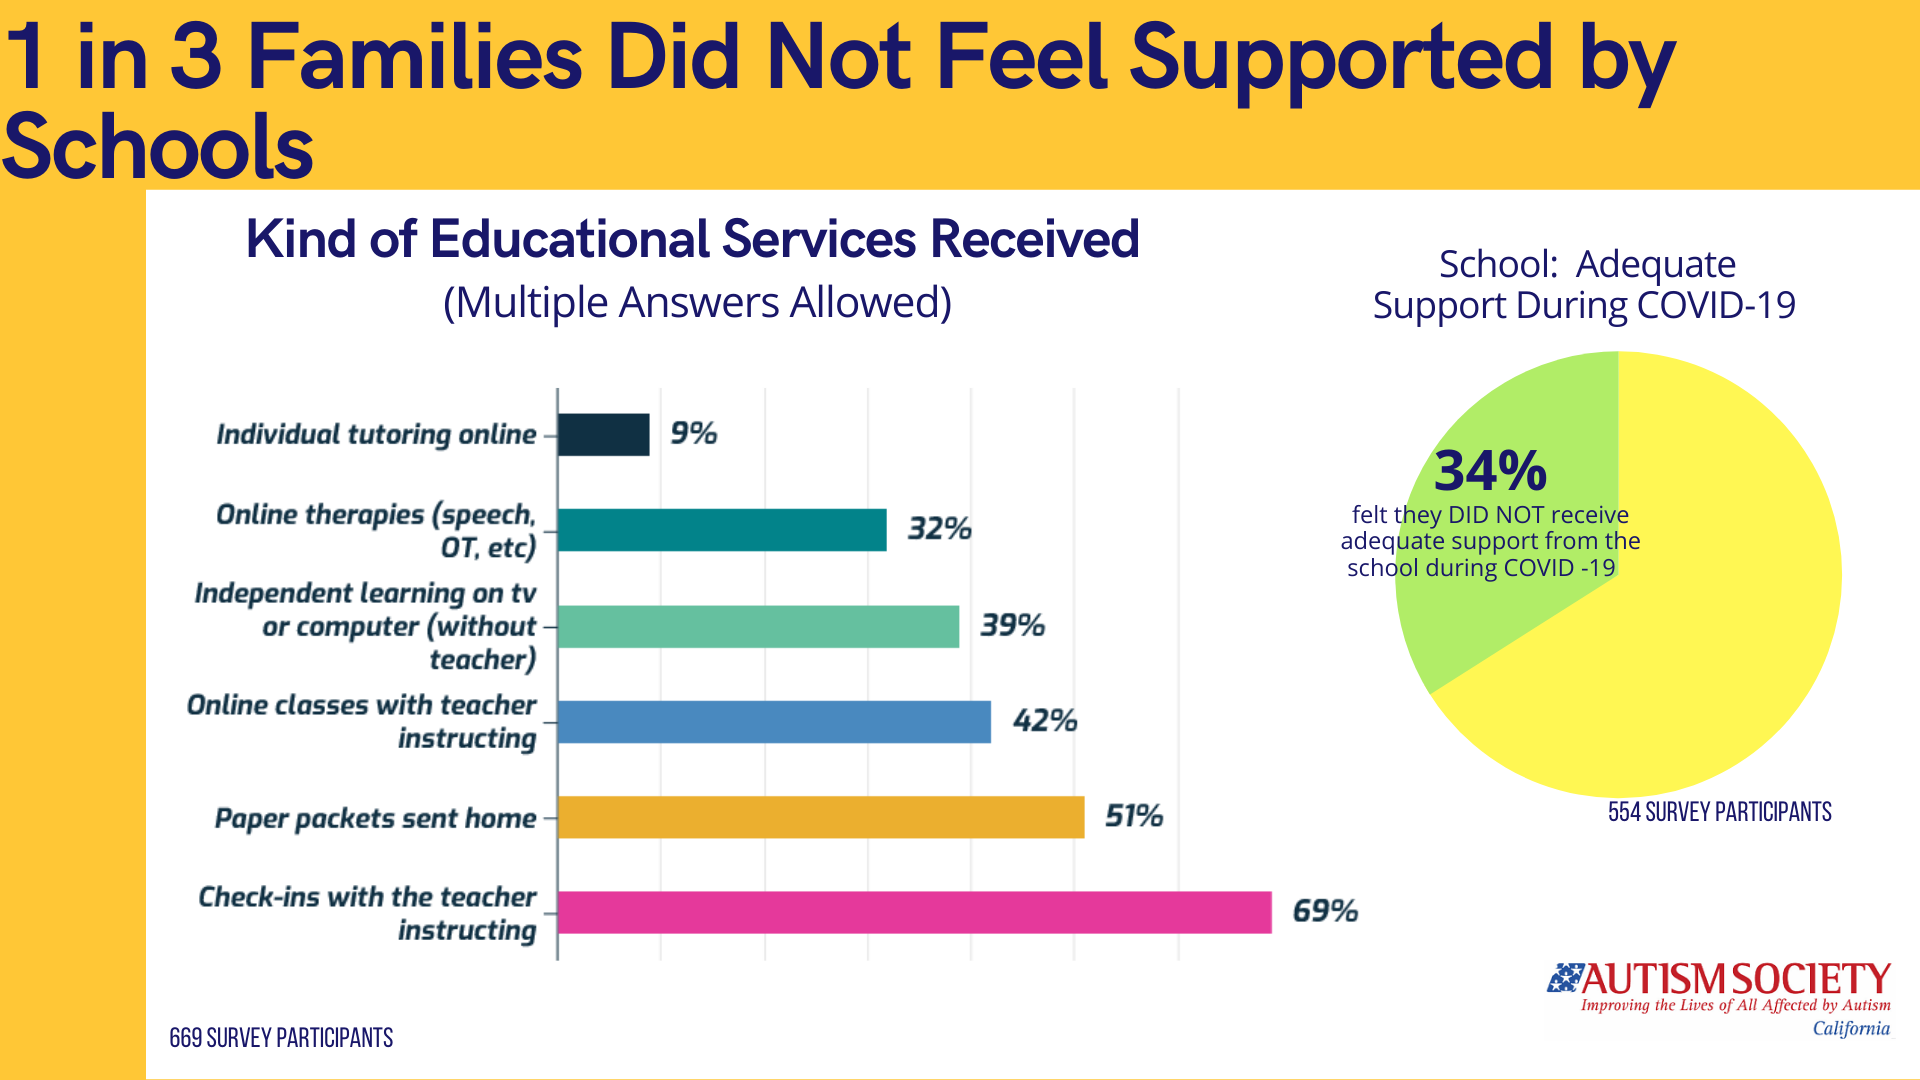 1 in 3 families did not feel supported